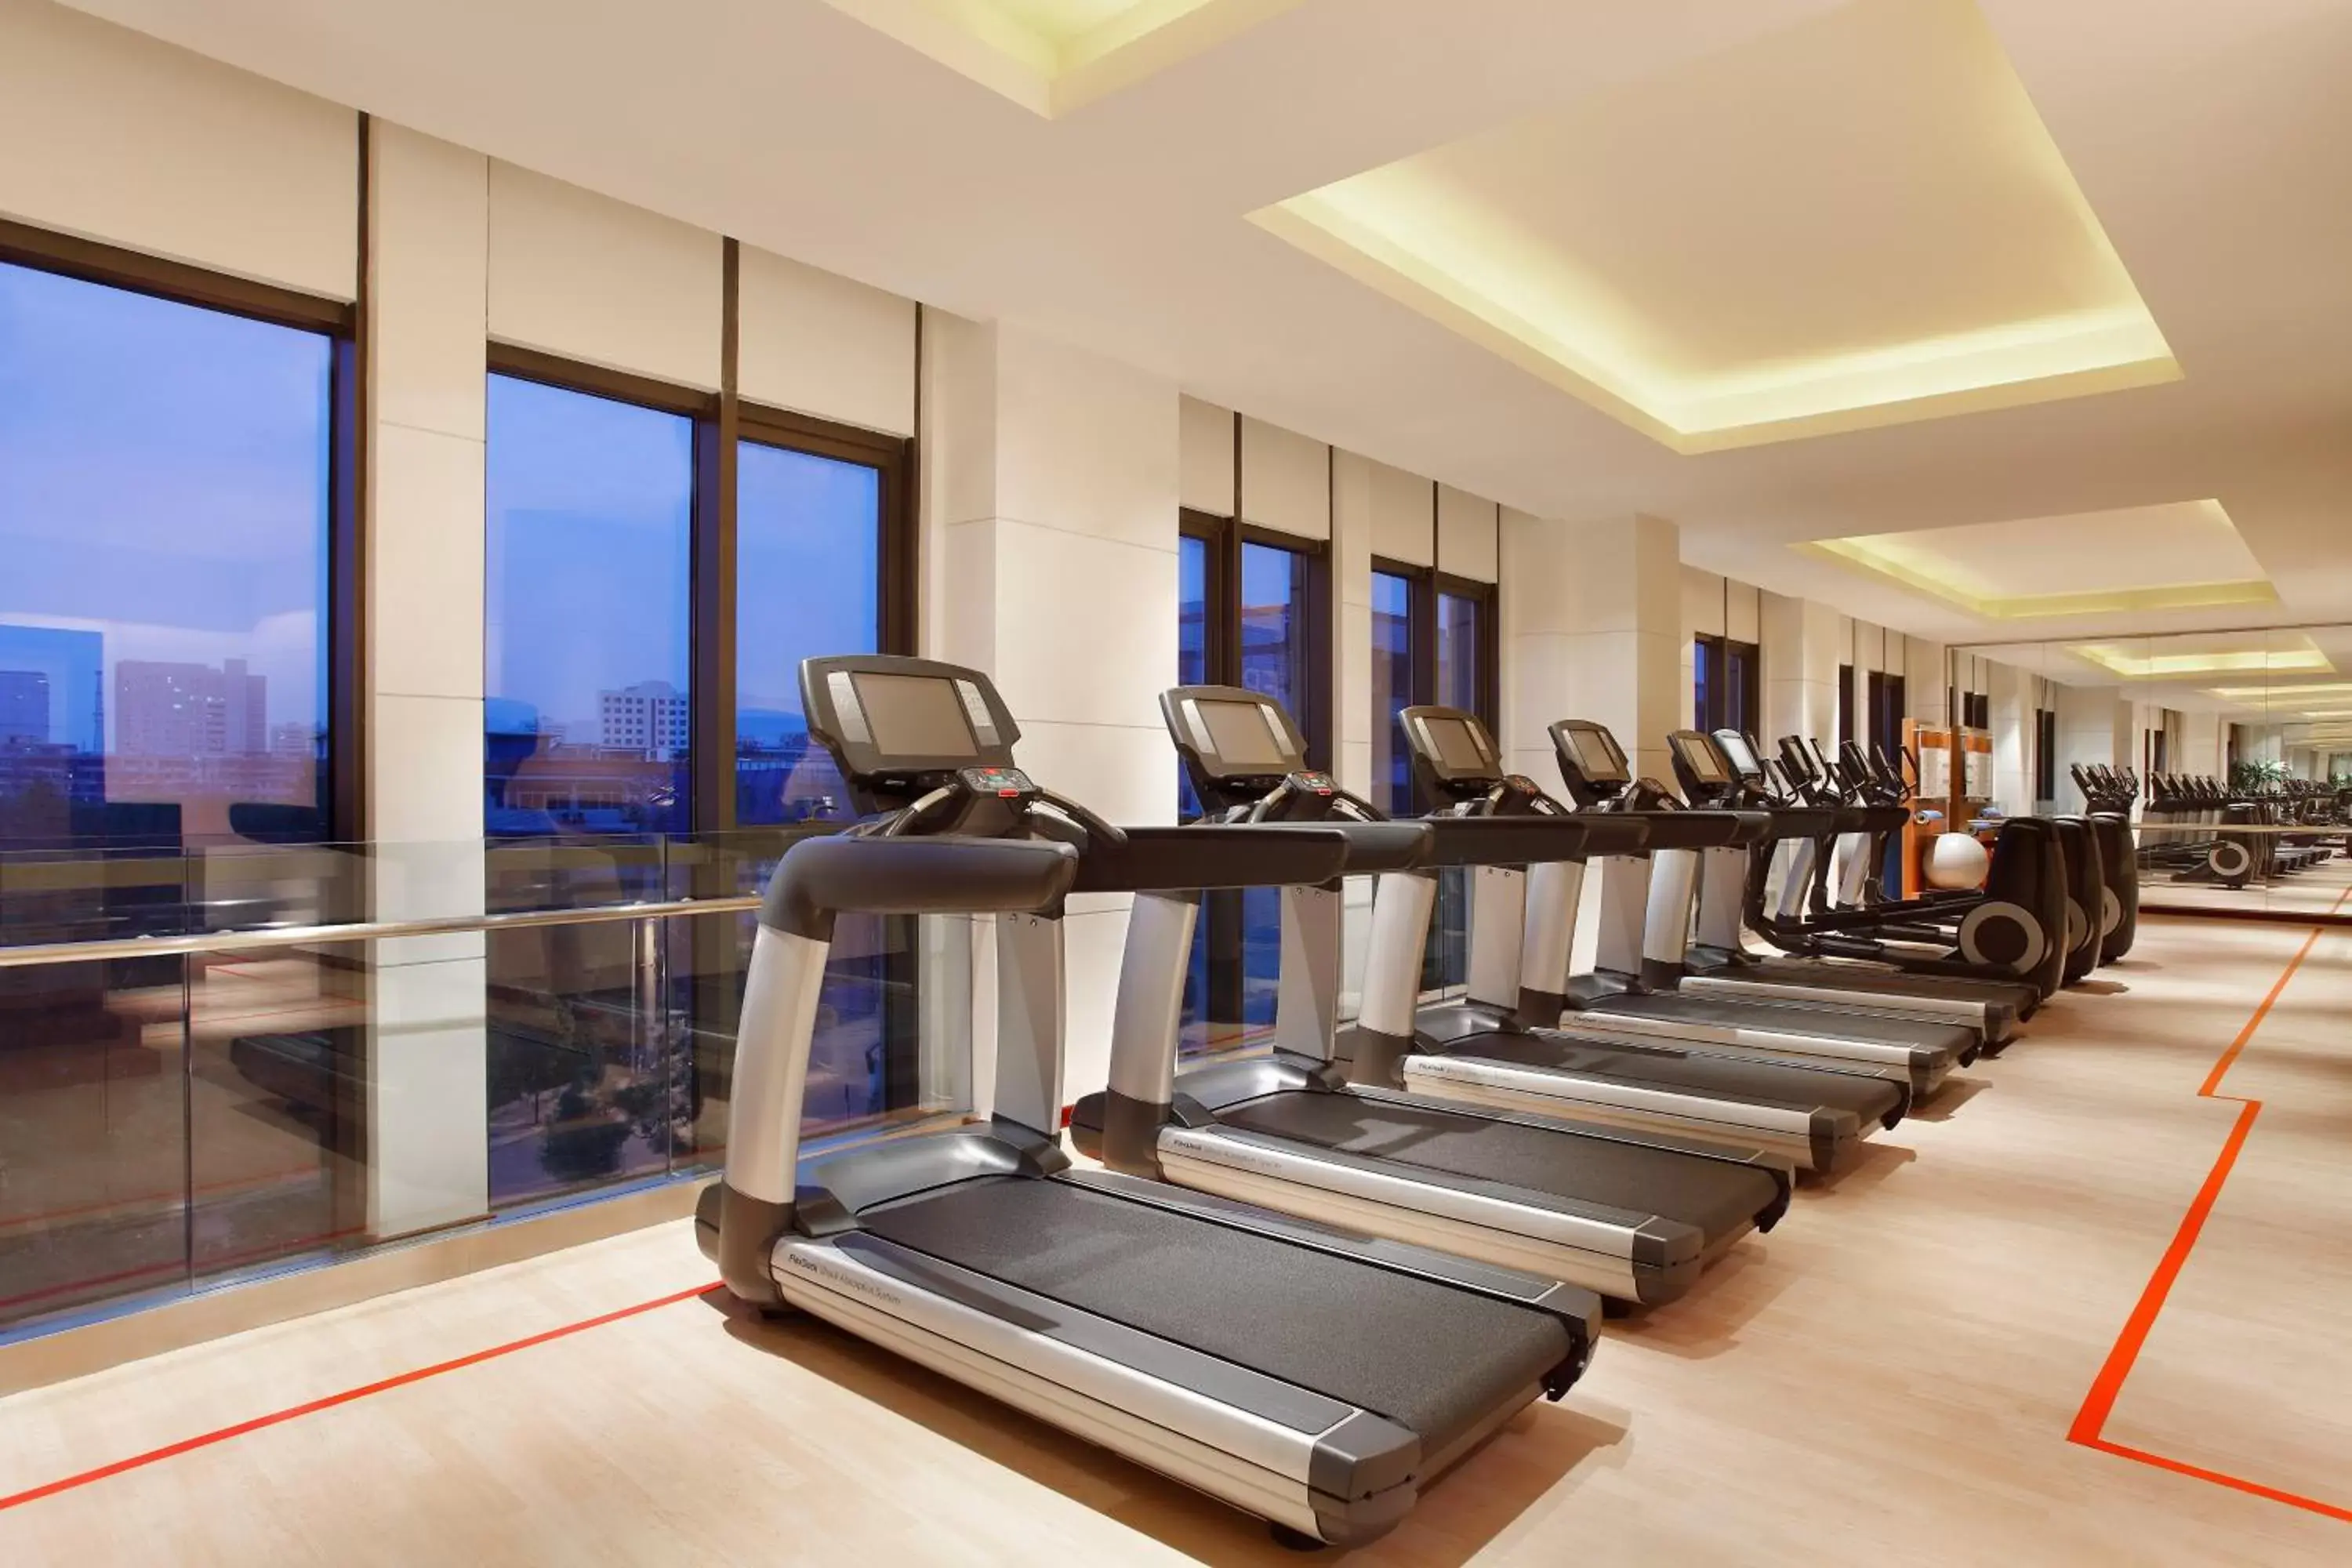 Fitness centre/facilities, Fitness Center/Facilities in Sheraton Wenzhou Hotel